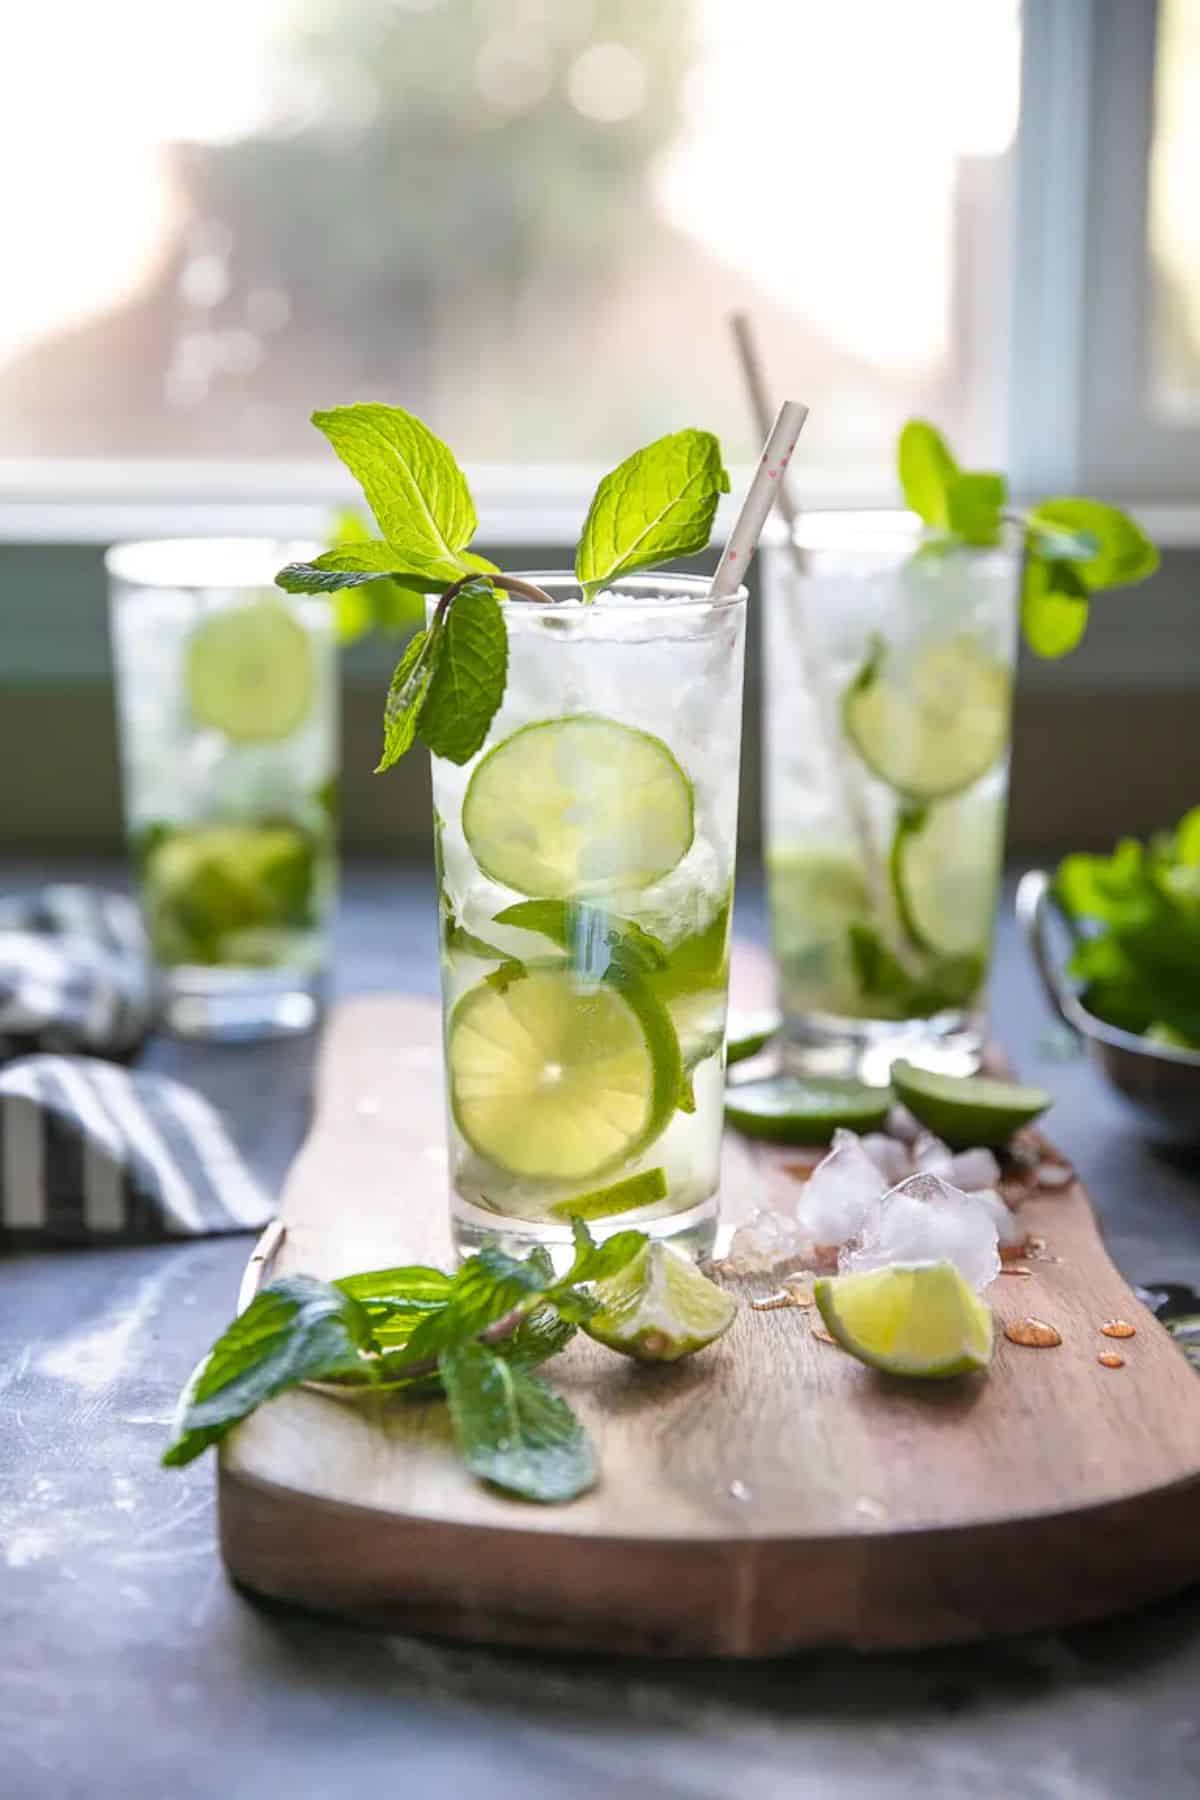 Mojito rum cocktails in two tall glass cups with sliced of lime on a wooden cutting board.